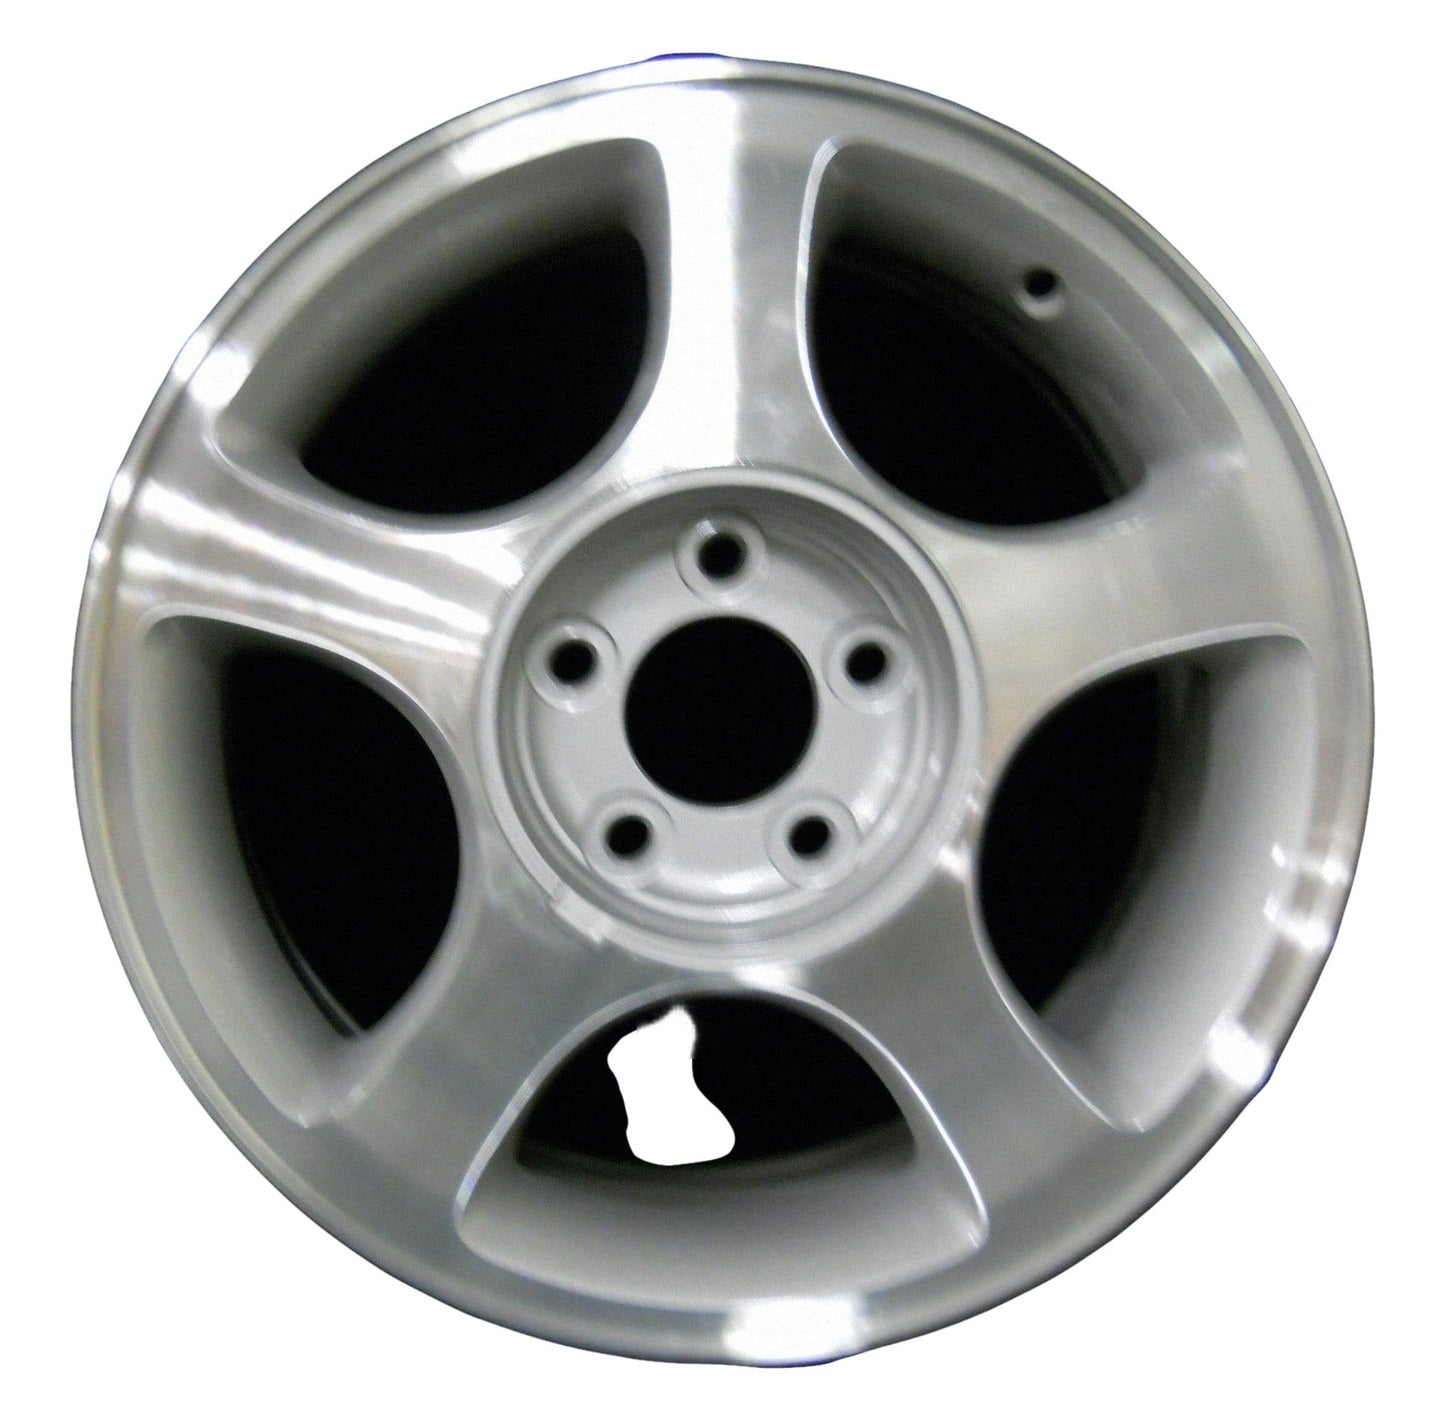 Ford Mustang  2000, 2001, 2002, 2003, 2004 Factory OEM Car Wheel Size 16x7.5 Alloy WAO.3375A.PS02.MA